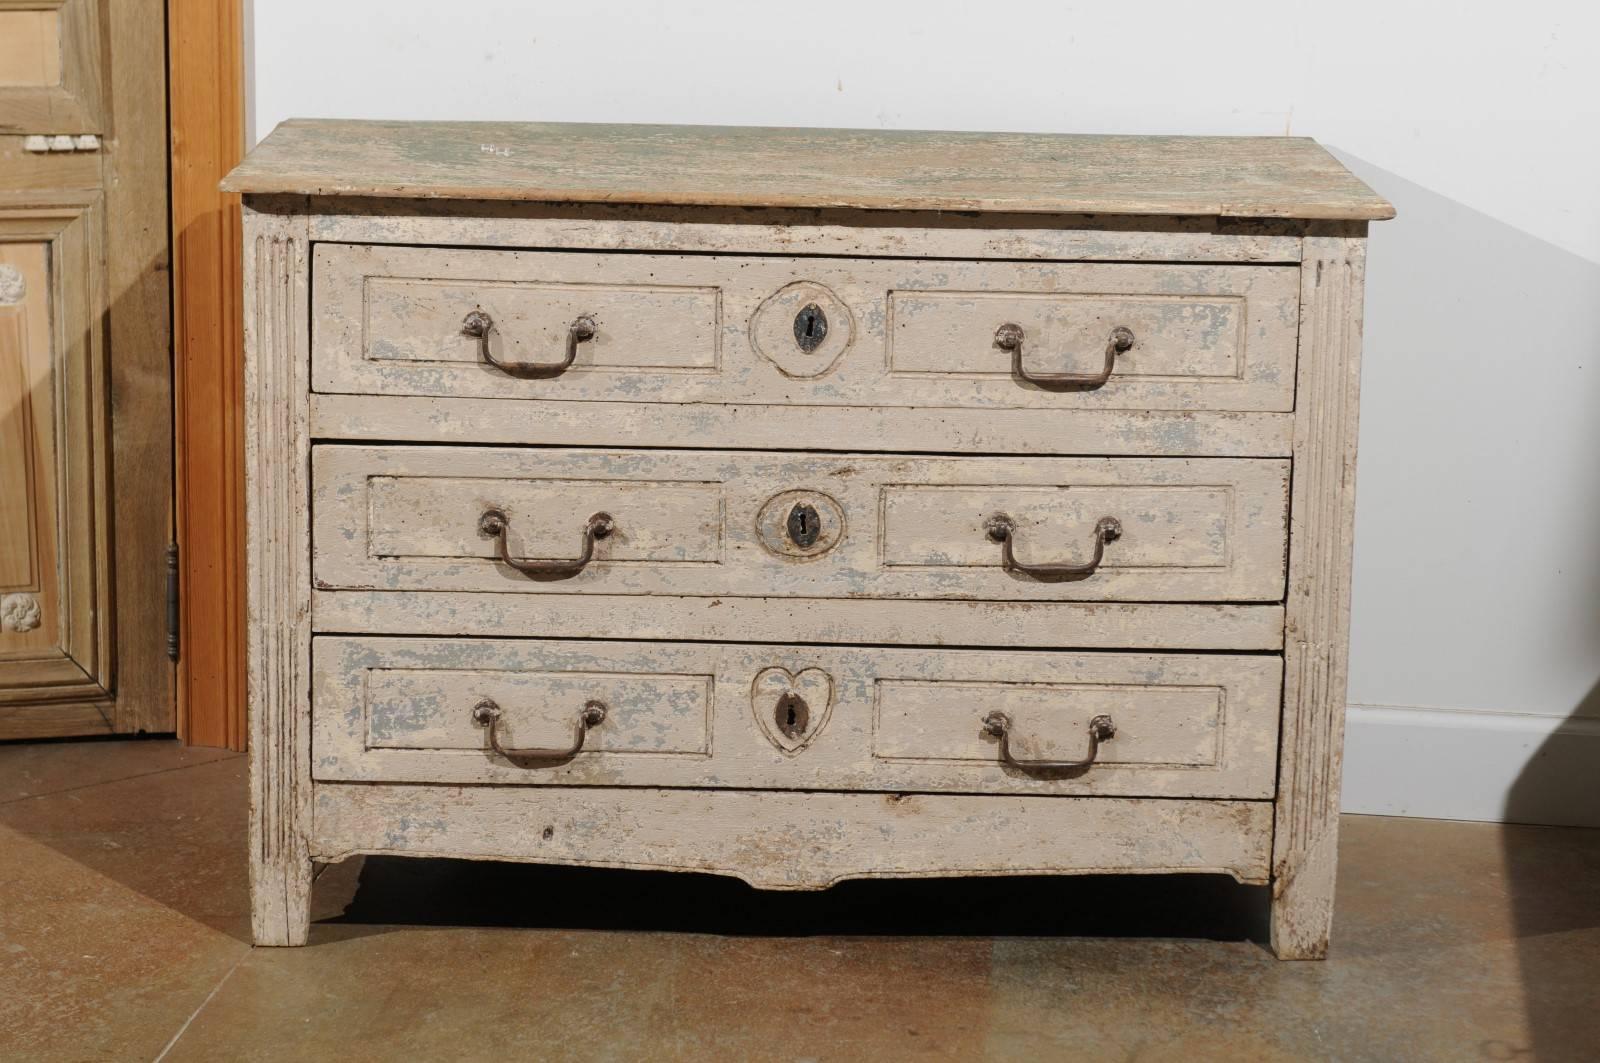 A petite French neoclassical Provençale white painted three-drawer commode from the early 19th century. Born in the early 1800s in the Southern French city of Aix-en-Provence, particularly dear to Cézanne (think the Mountain Sainte-Victoire) this